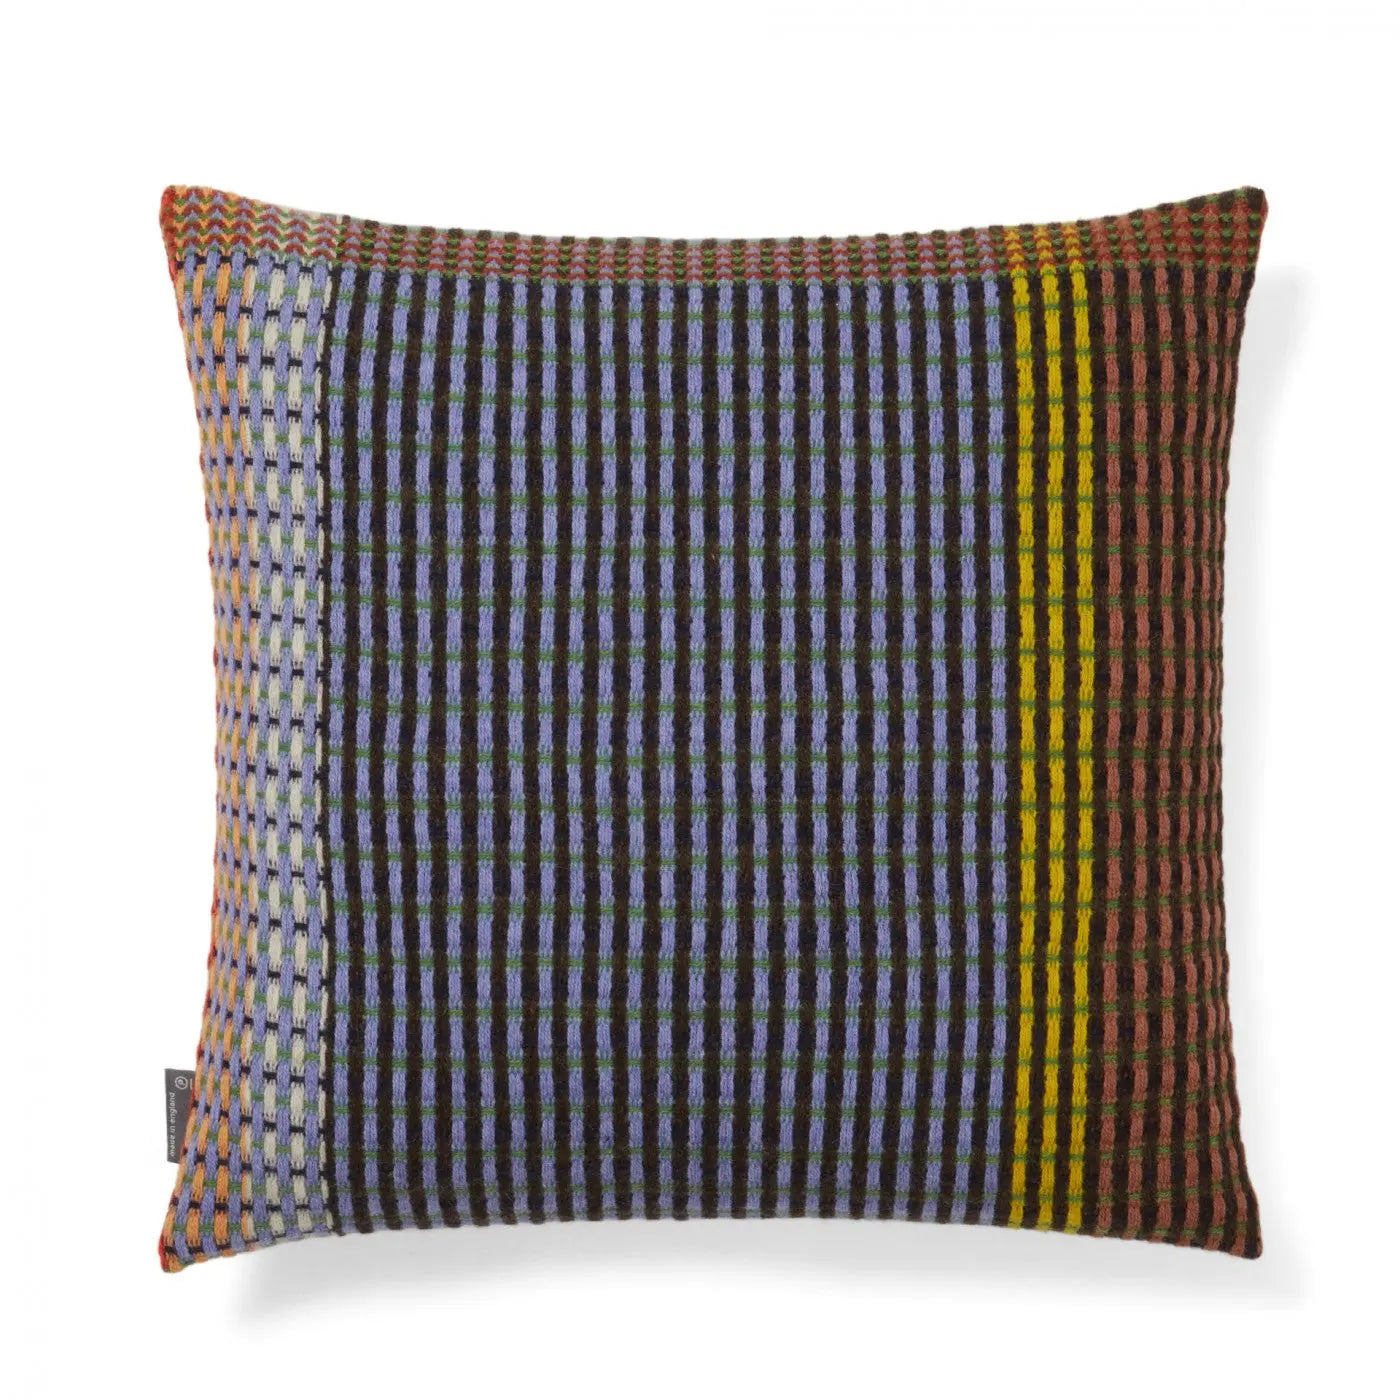 Wallace and Sewell-Jocelyn Cushion Wallace & Sewell